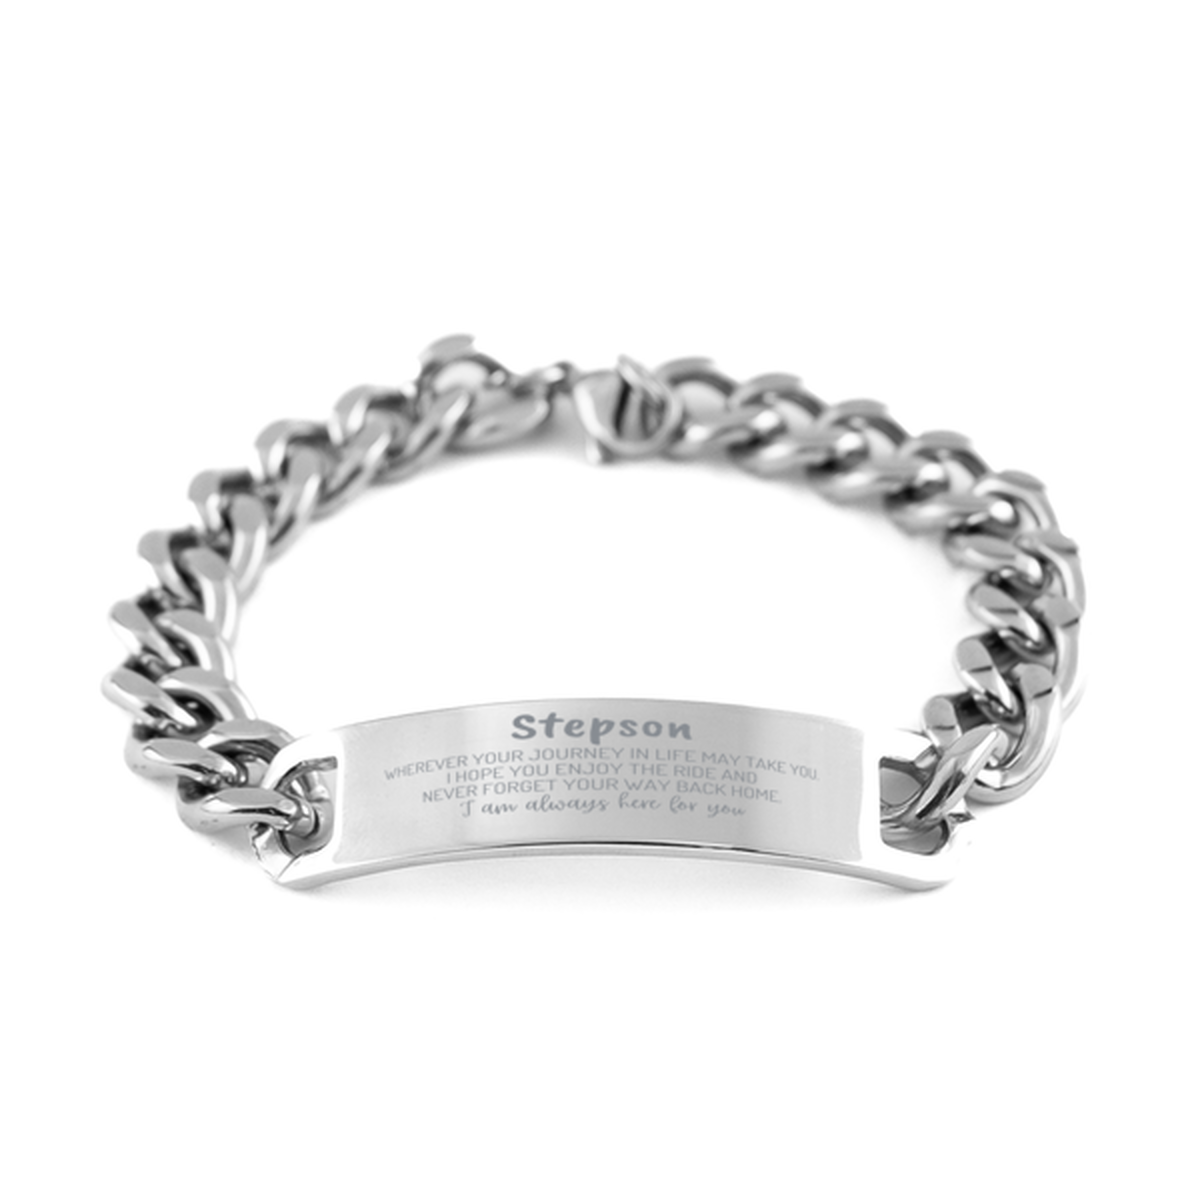 Stepson wherever your journey in life may take you, I am always here for you Stepson Cuban Chain Stainless Steel Bracelet, Awesome Christmas Gifts For Stepson, Stepson Birthday Gifts for Men Women Family Loved One